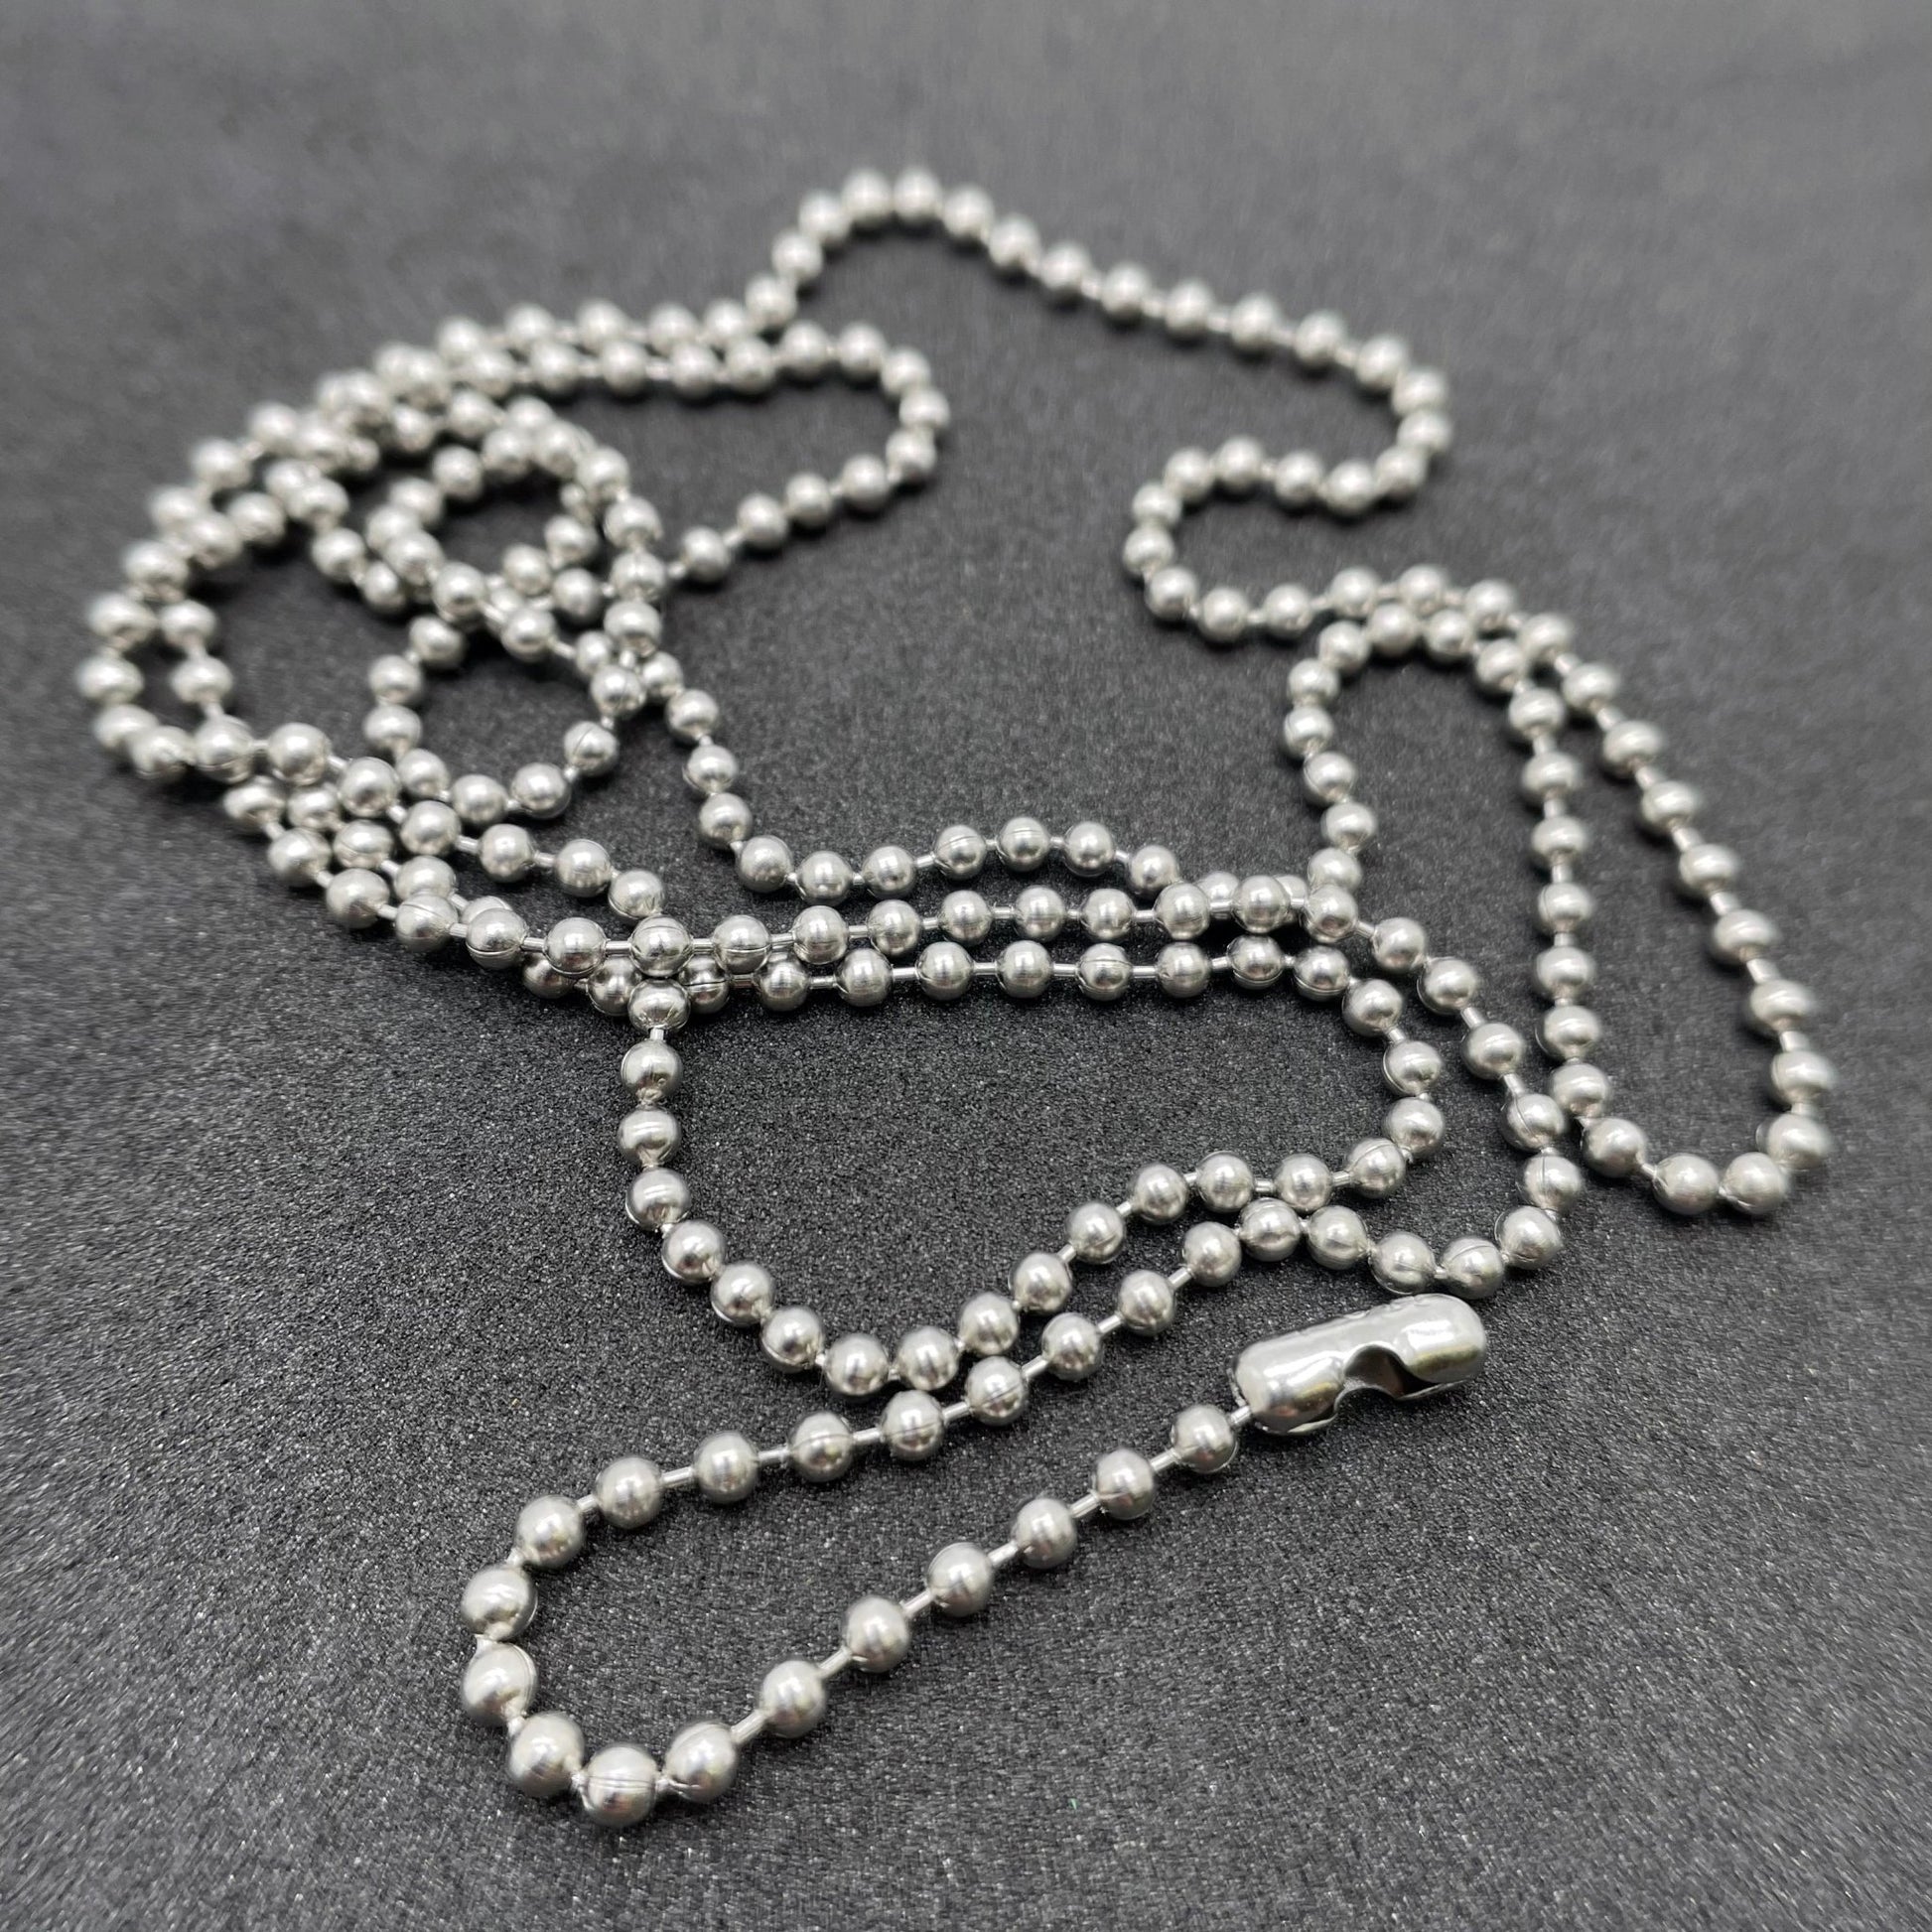 Replacement 30" Stainless Steel Chain - 304 Grade - U.S.A Ball Bead with connector (1 - 10 Pack) - TheDogTagCo